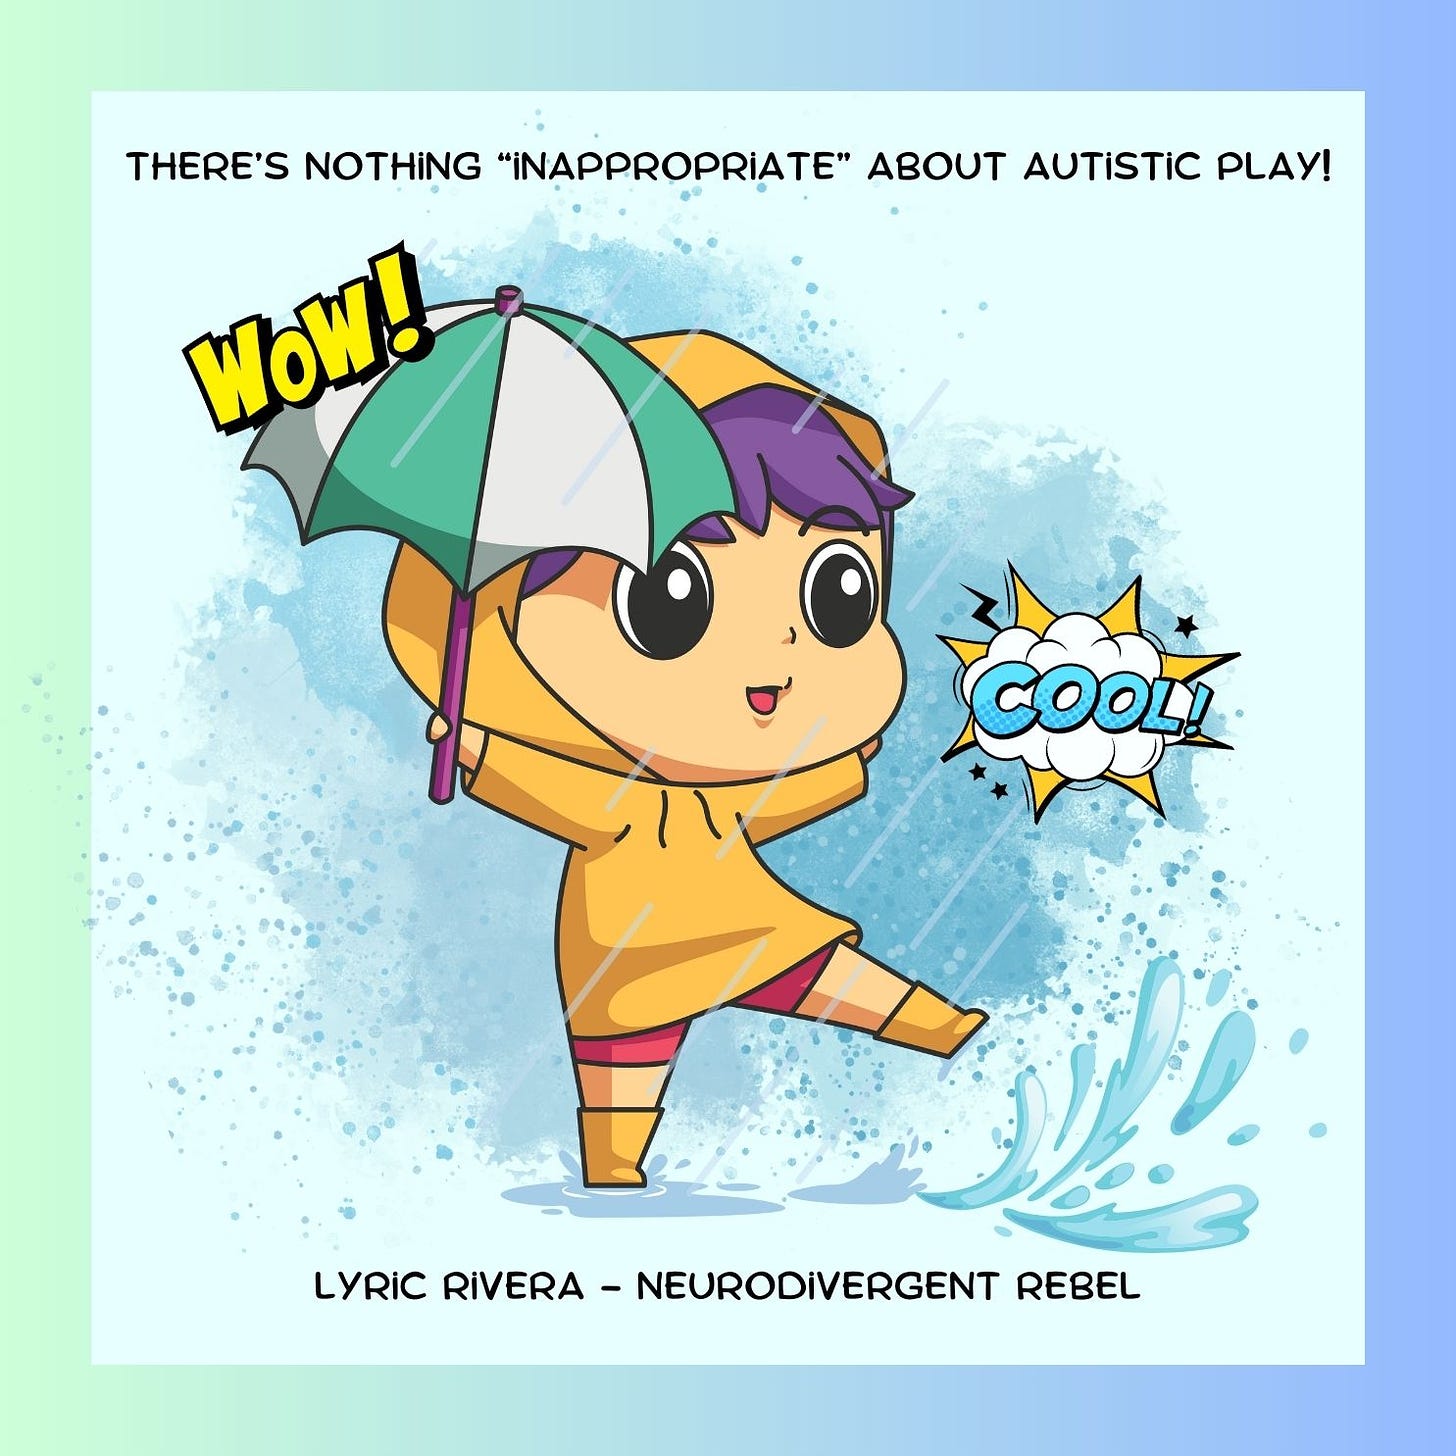 There is nothing “inappropriate” about Autistic Play - Lyric Rivera - NeuroDivergent Rebel - with an image of a young person wearing a yellow rain coat, with a green and white umbrella, sensory seeking by splashing in puddles. 